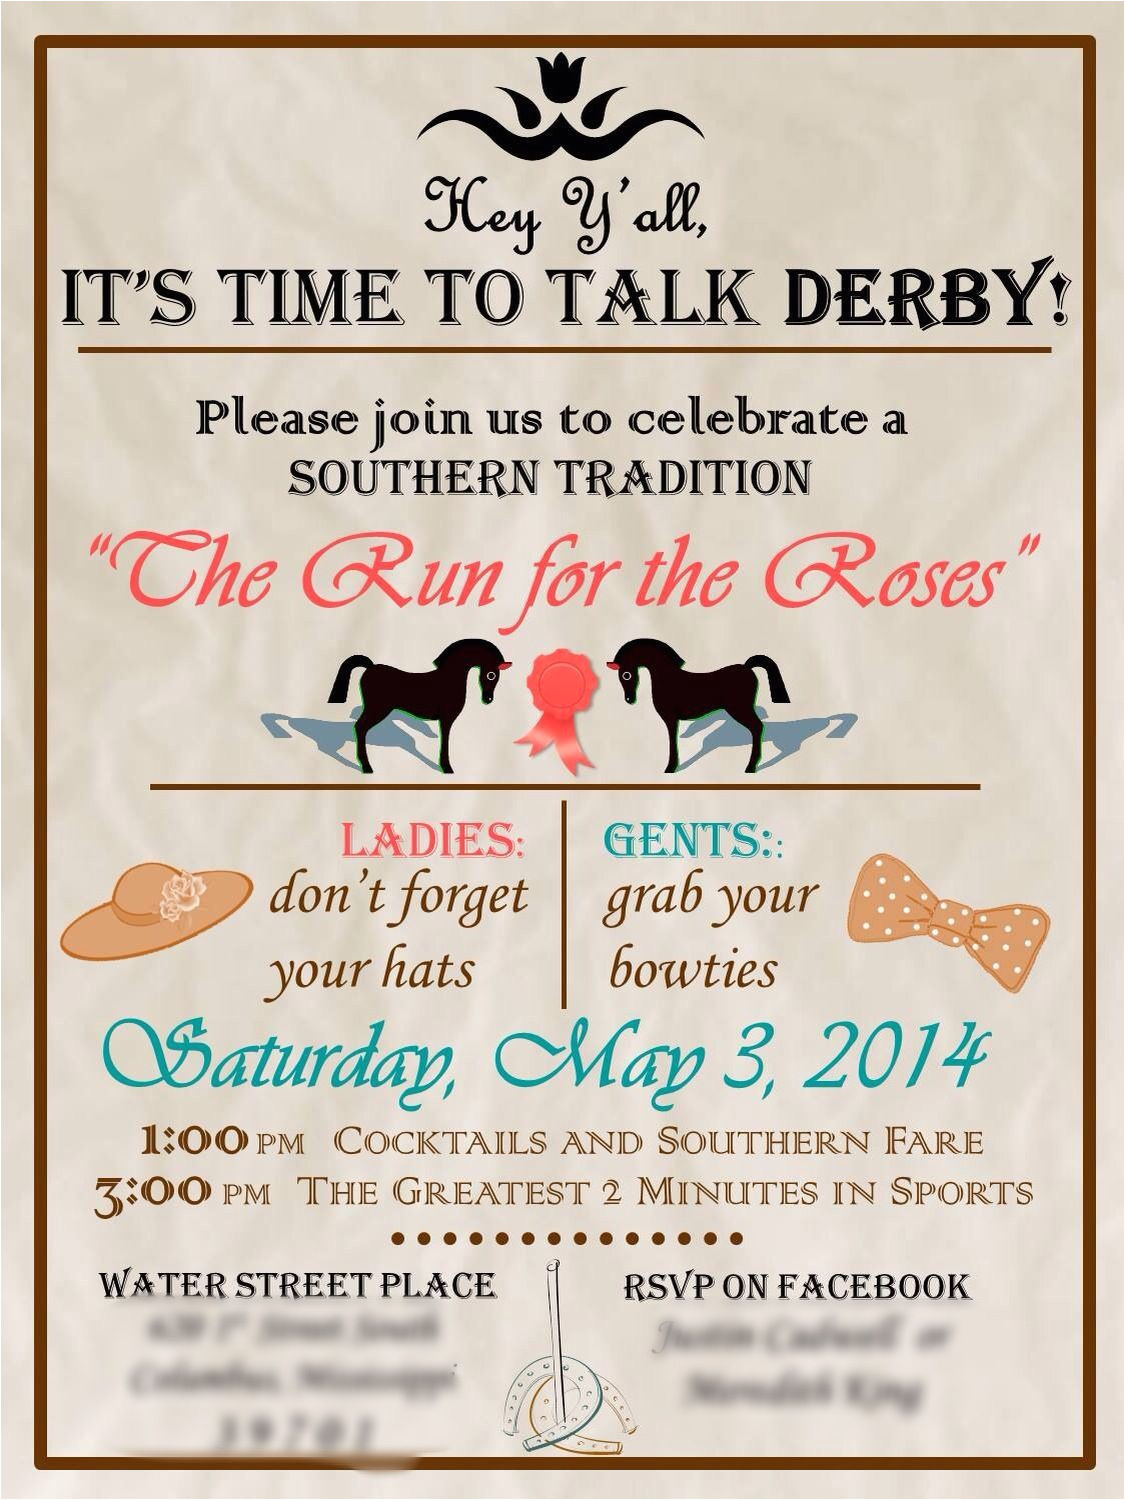 Kentucky Derby Party Invitation Template My Kentucky Derby Party Invitation In 2019 Kentucky